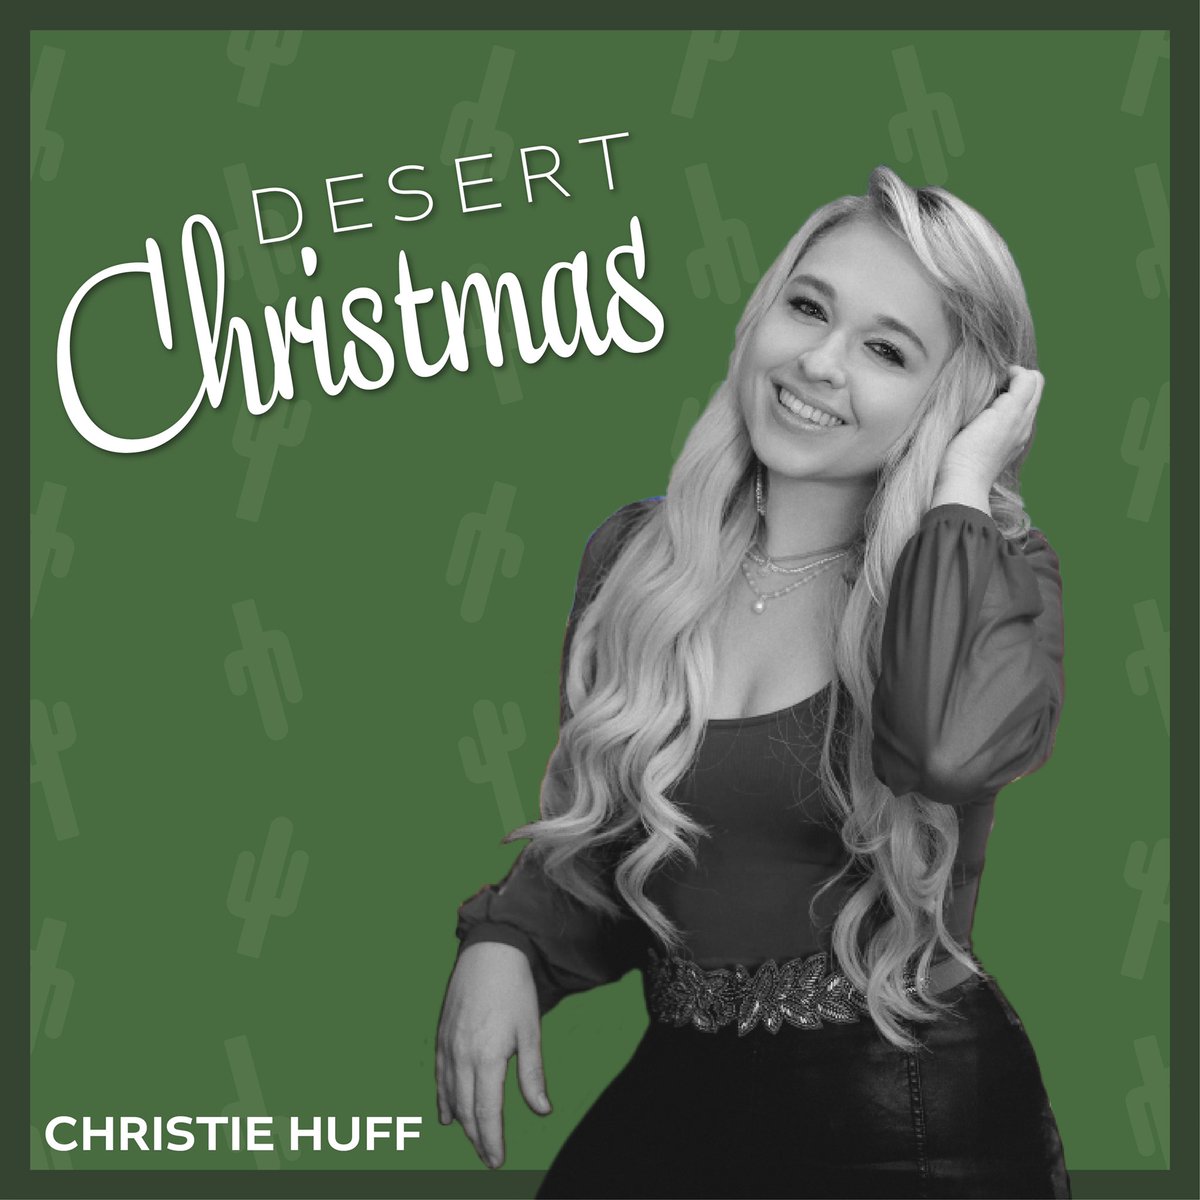 “Desert Christmas” it OUT!! Go listen! I hope this song gets you in the holiday spirit! 🎄🌵 #desertchristmas #outnow Listen: ffm.to/desertchristmas